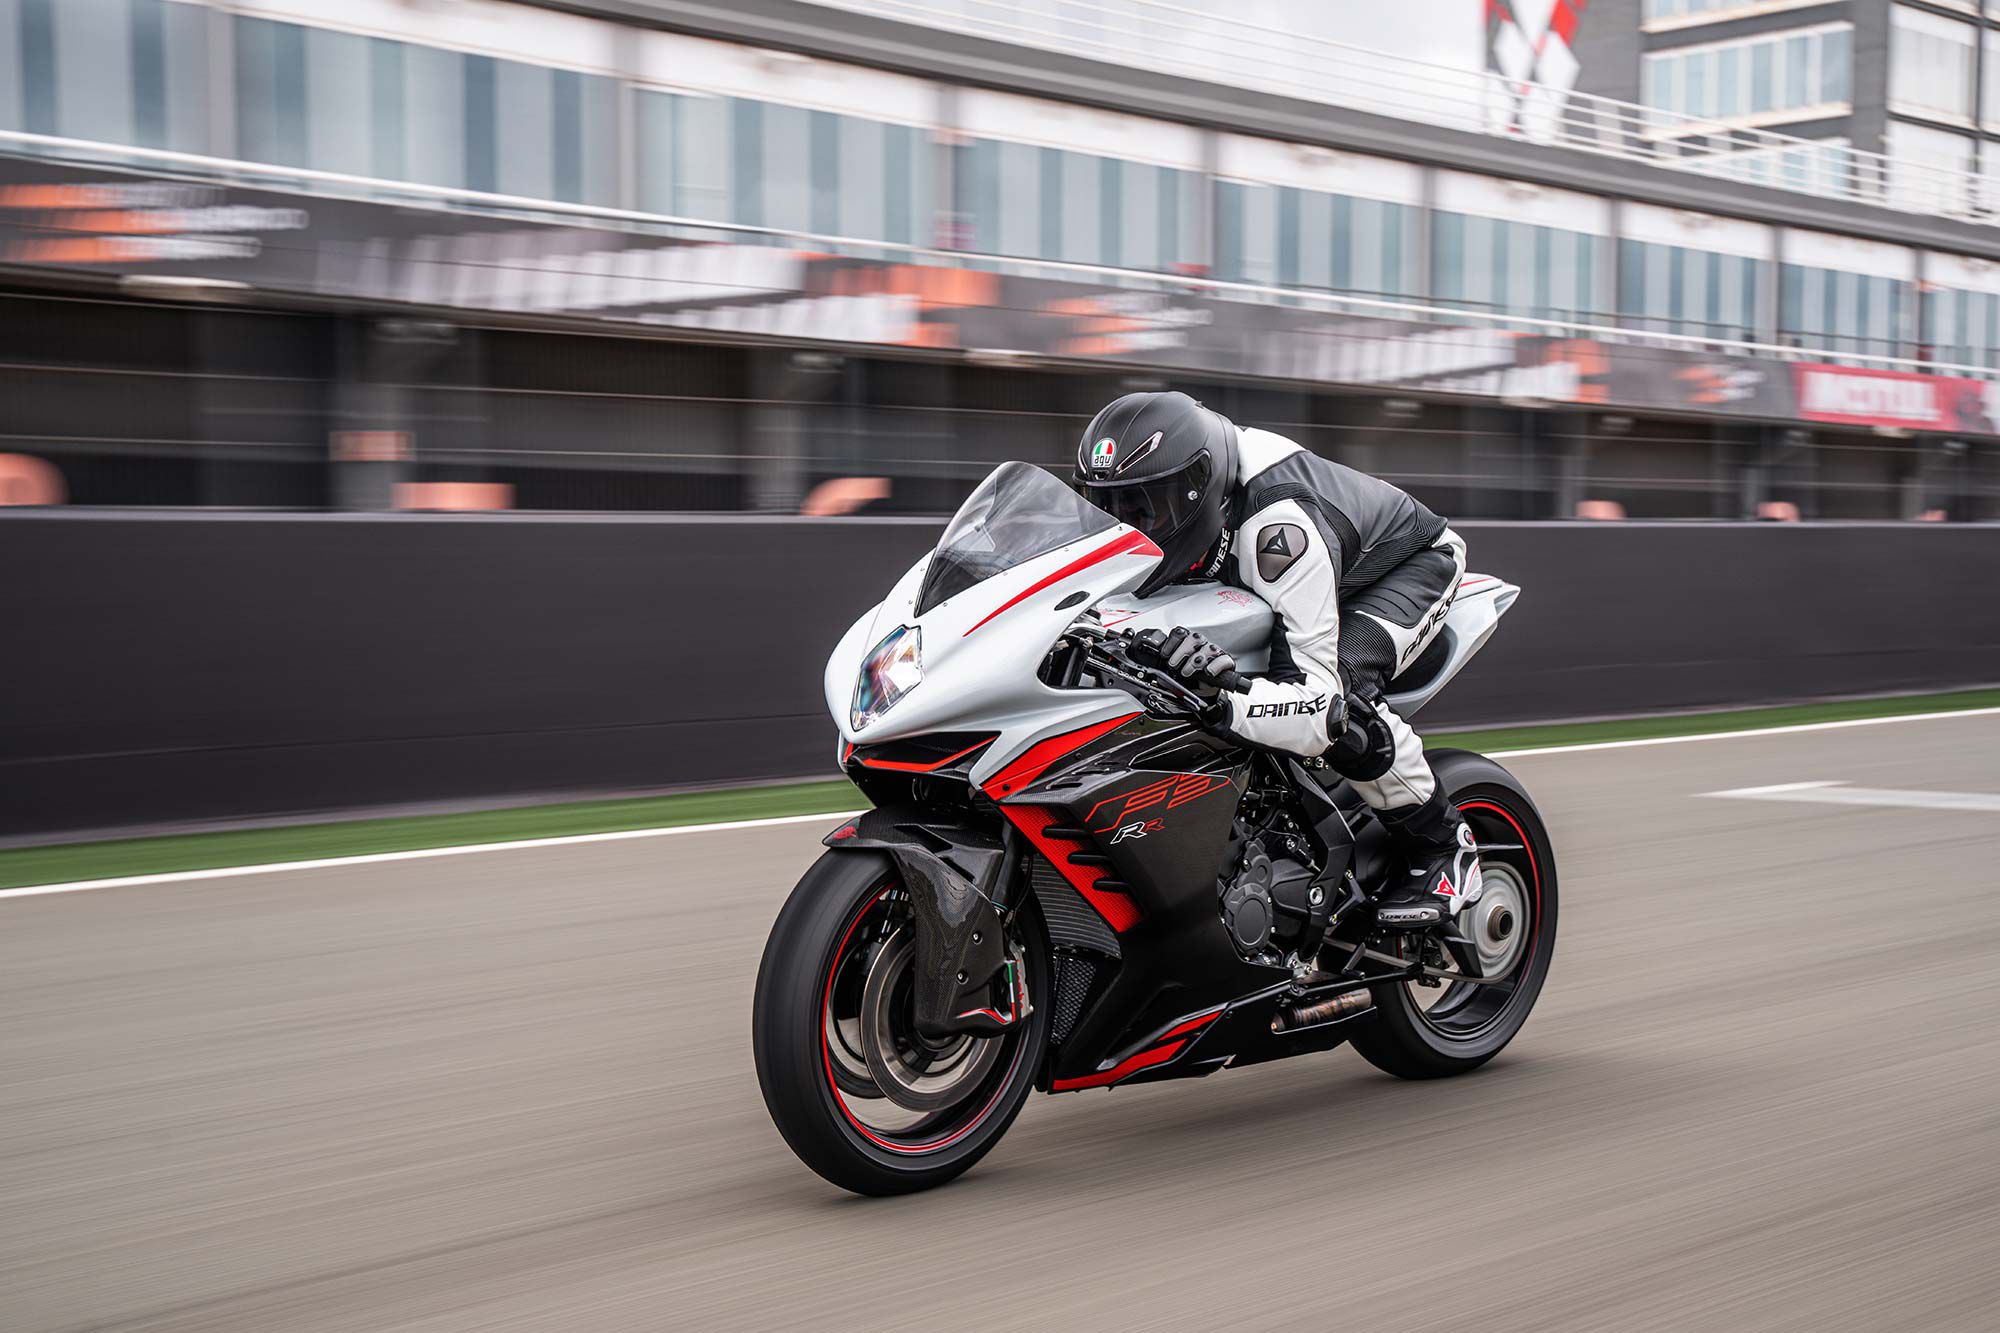 The 2022 MV Agusta F3 RR packs a smoother, more efficient engine.